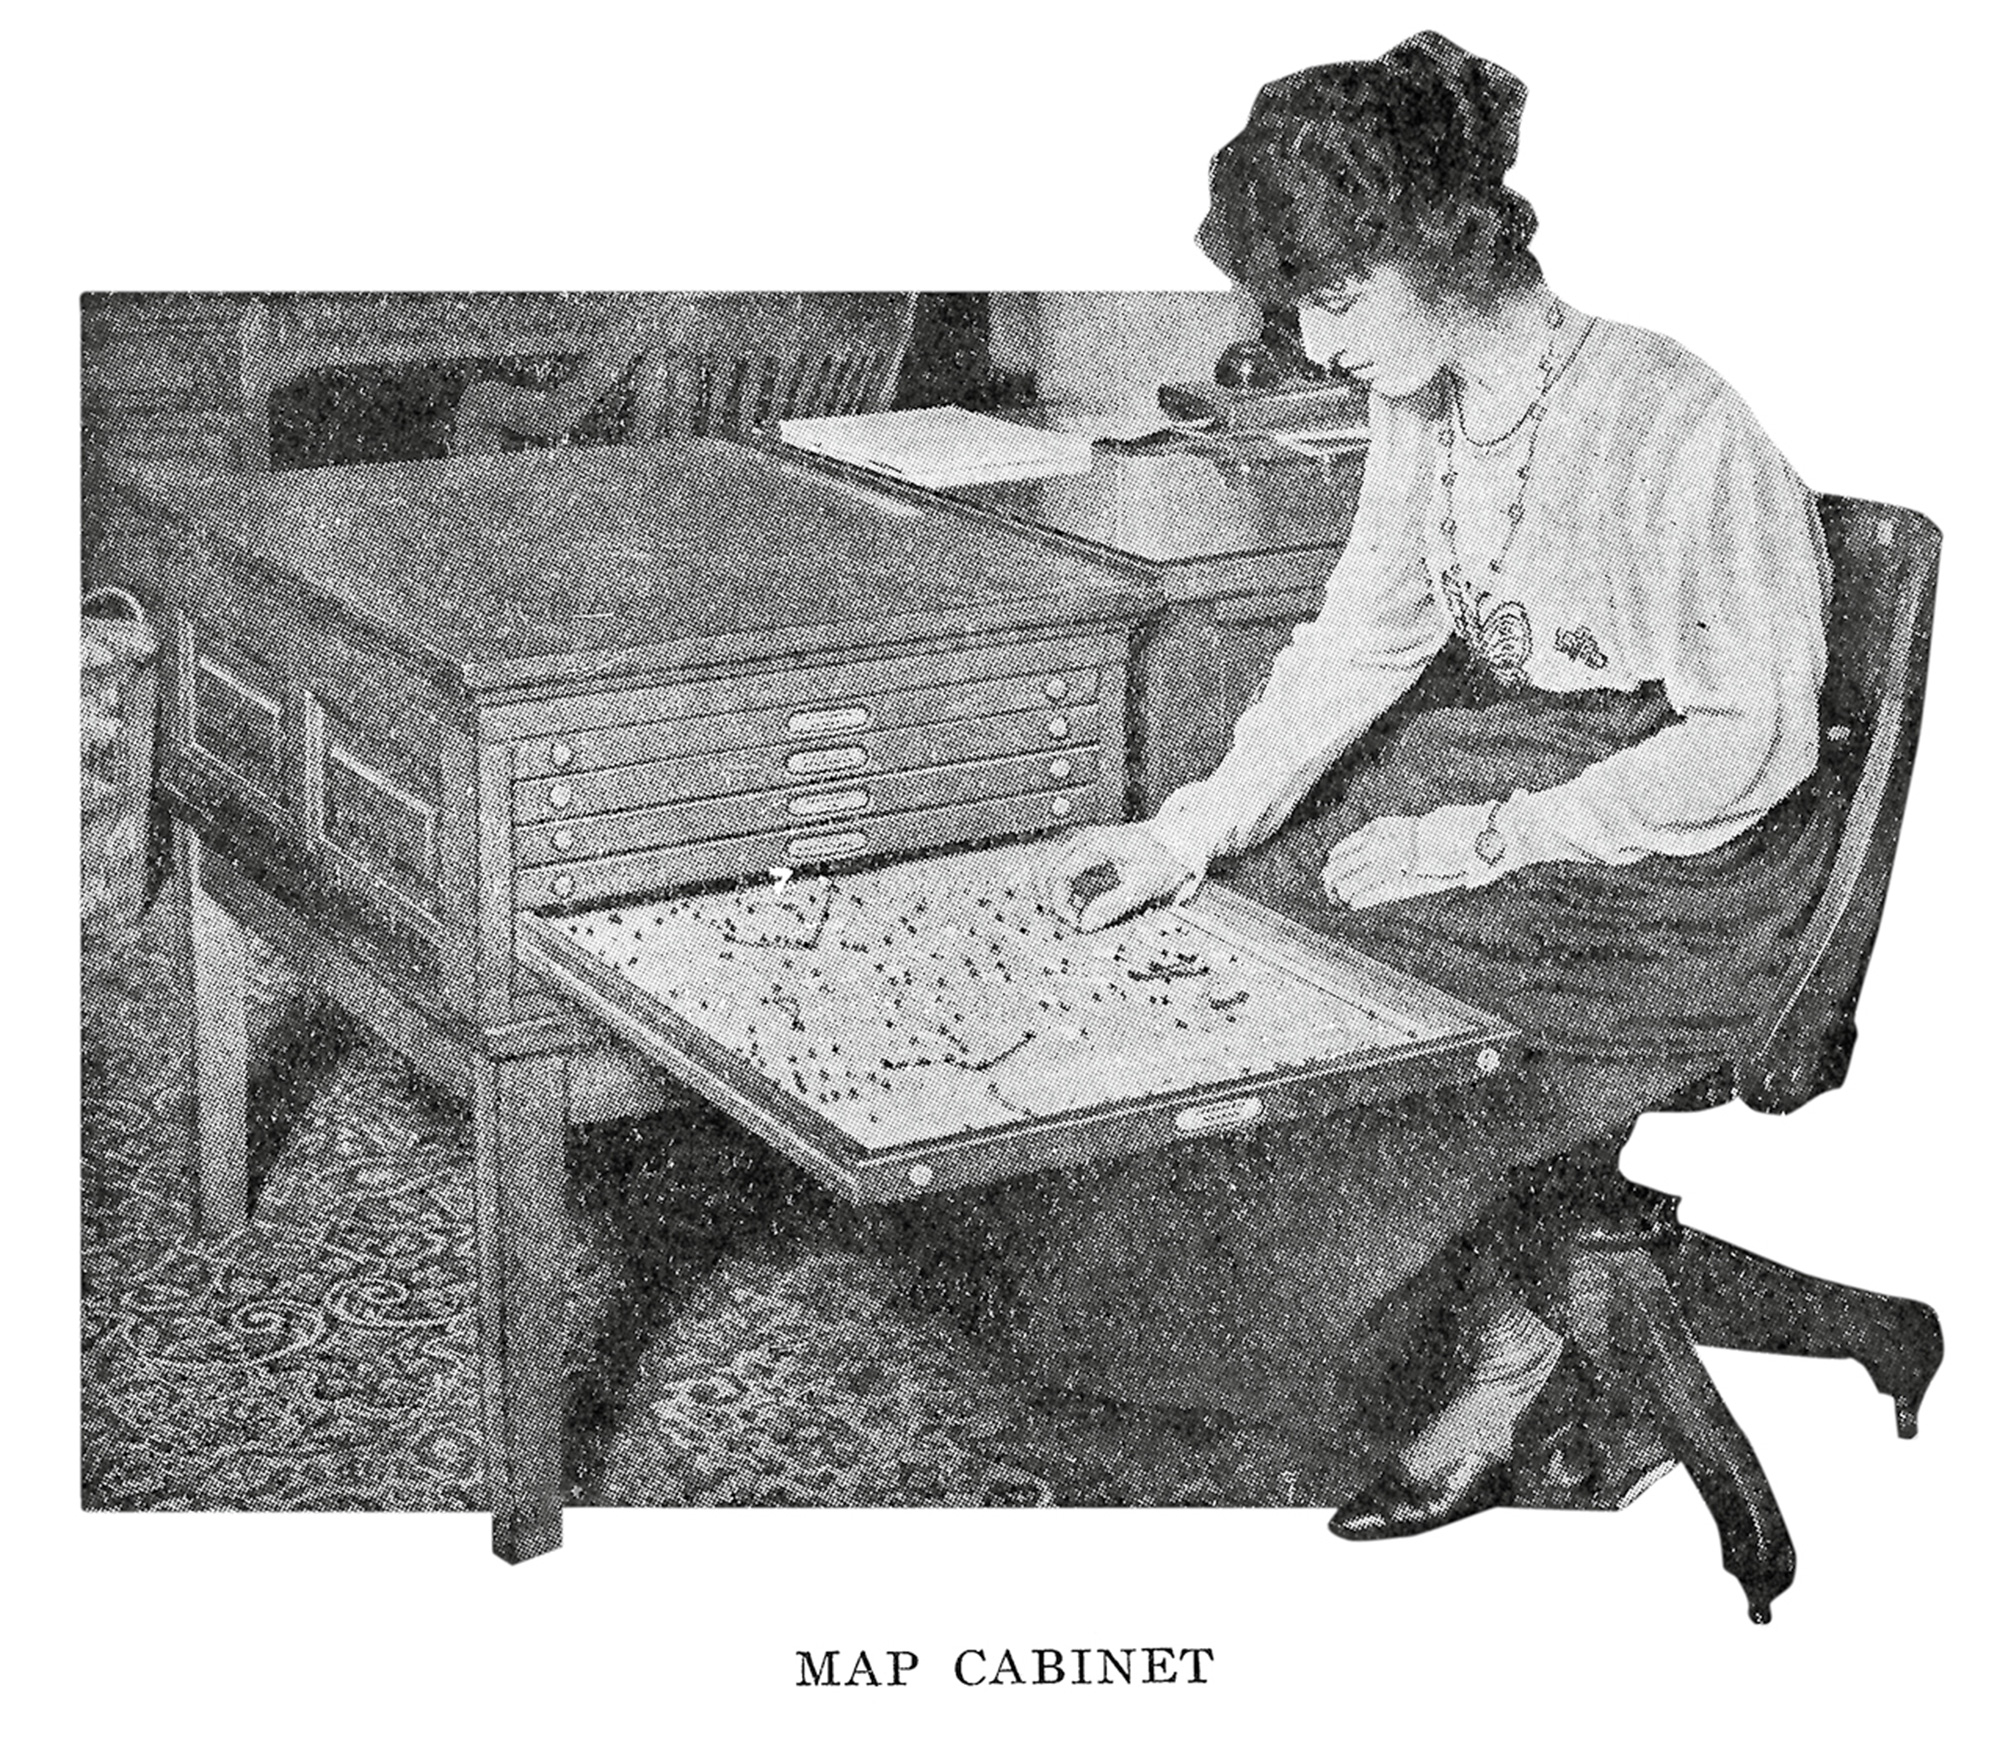 A photographic illustration of a secretary plotting something on a map contained in a map cabinet. By the nineteen twenties, the TSP was a sufficiently pressing problem for large companies that secretarial training could include instruction on route-optimization, and map cabinets with pin and string kits for circuit planning were available for office use. Such practical applications required thinking about real roads and actual overland distances (later, most mathematical versions of the problem optimized purely geometrical, straight-line paths).